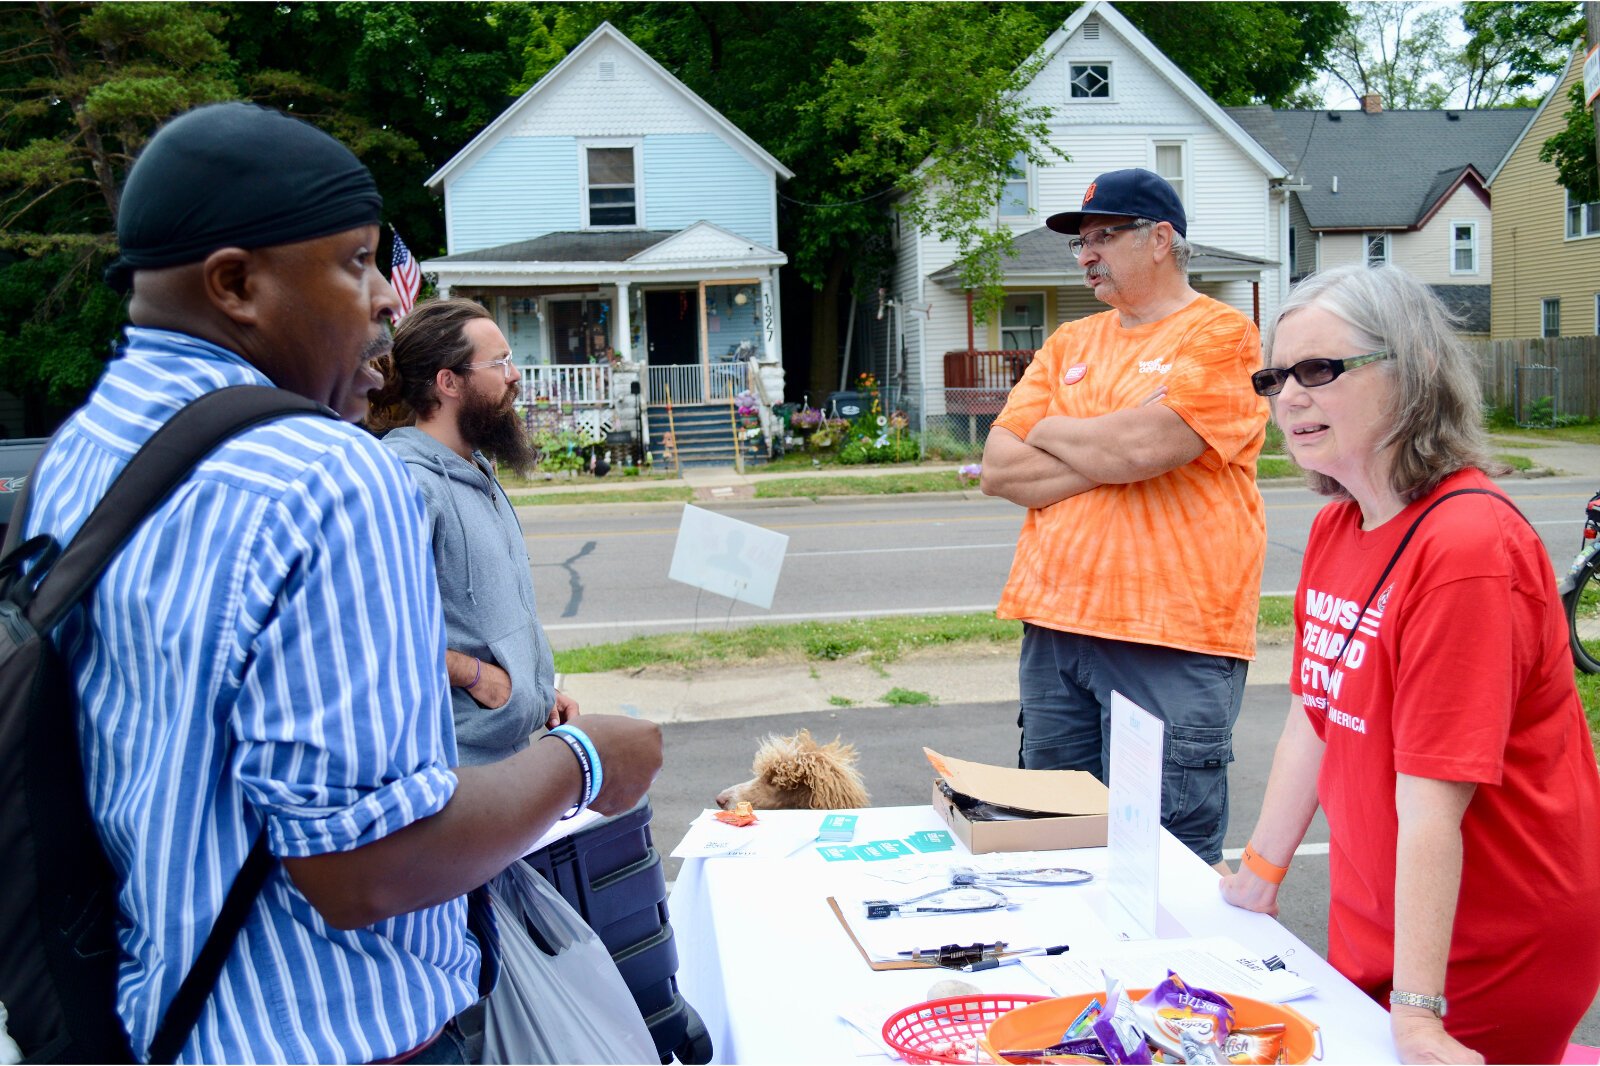 Alphonso Harris, left, a Northside resident who ran for Kalamazoo City Commission in 2021, speaks with a member of Kalamazoo Moms Demand Action. "Kalamazoo should not have this big gun problem. It's insane to me. We're not Chicago, we're not Detroit,